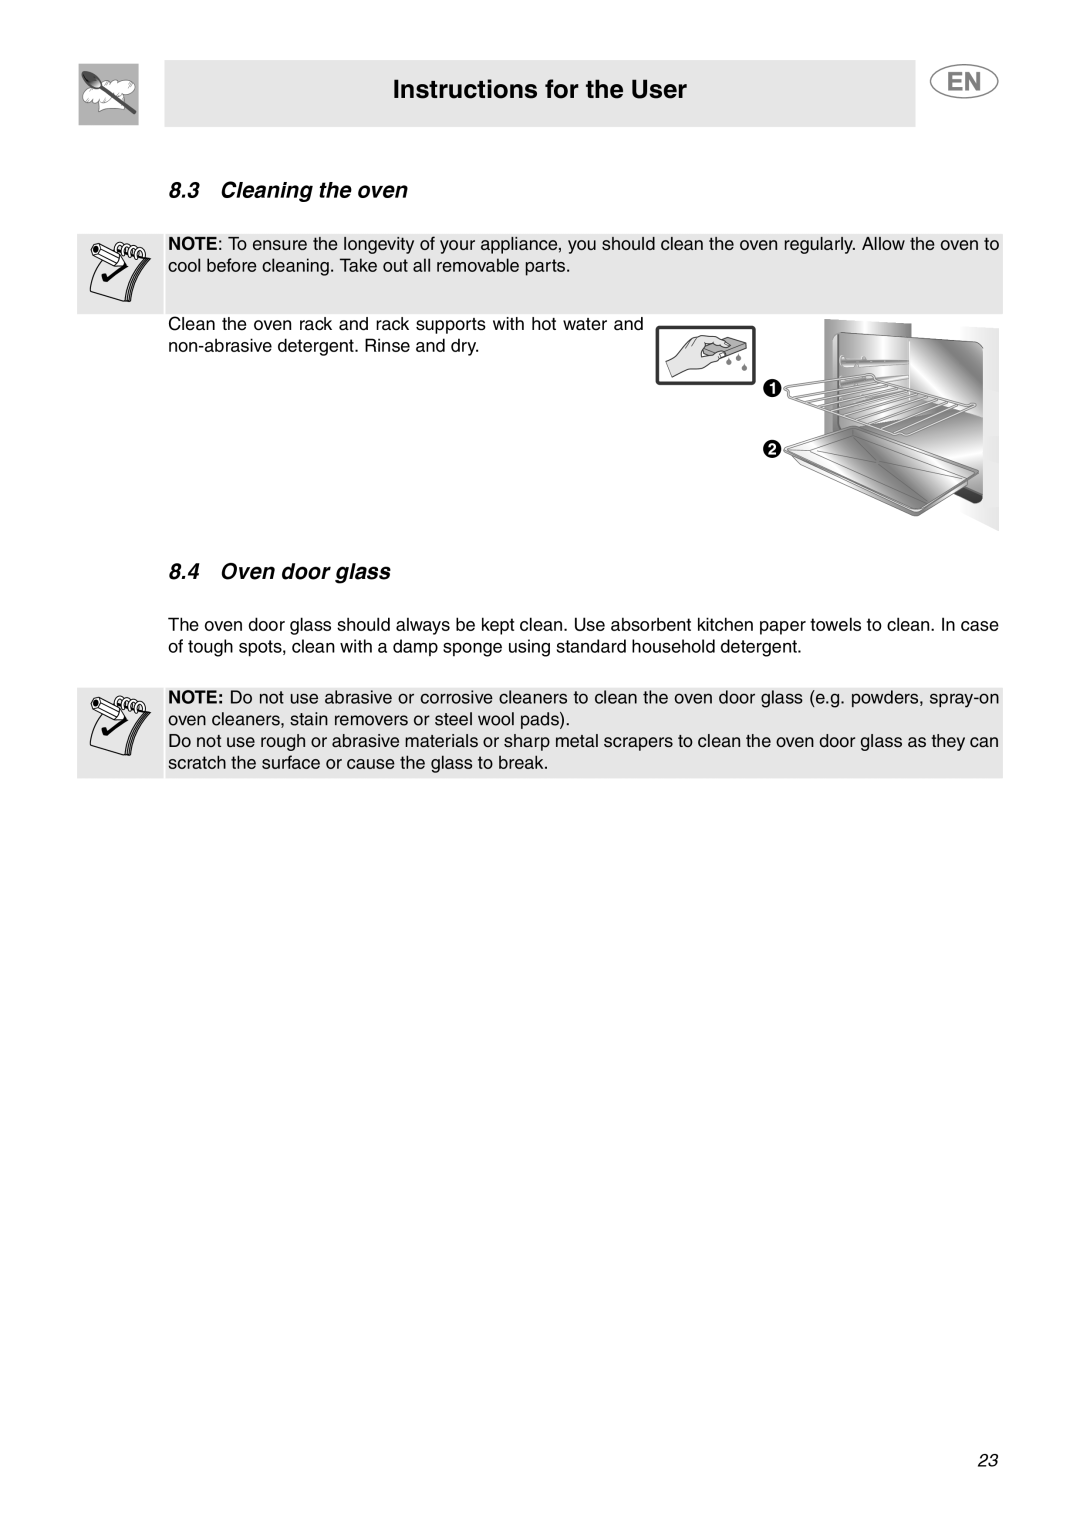 Smeg C6GGXU important safety instructions Cleaning the oven, Oven door glass, Instructions for the User 